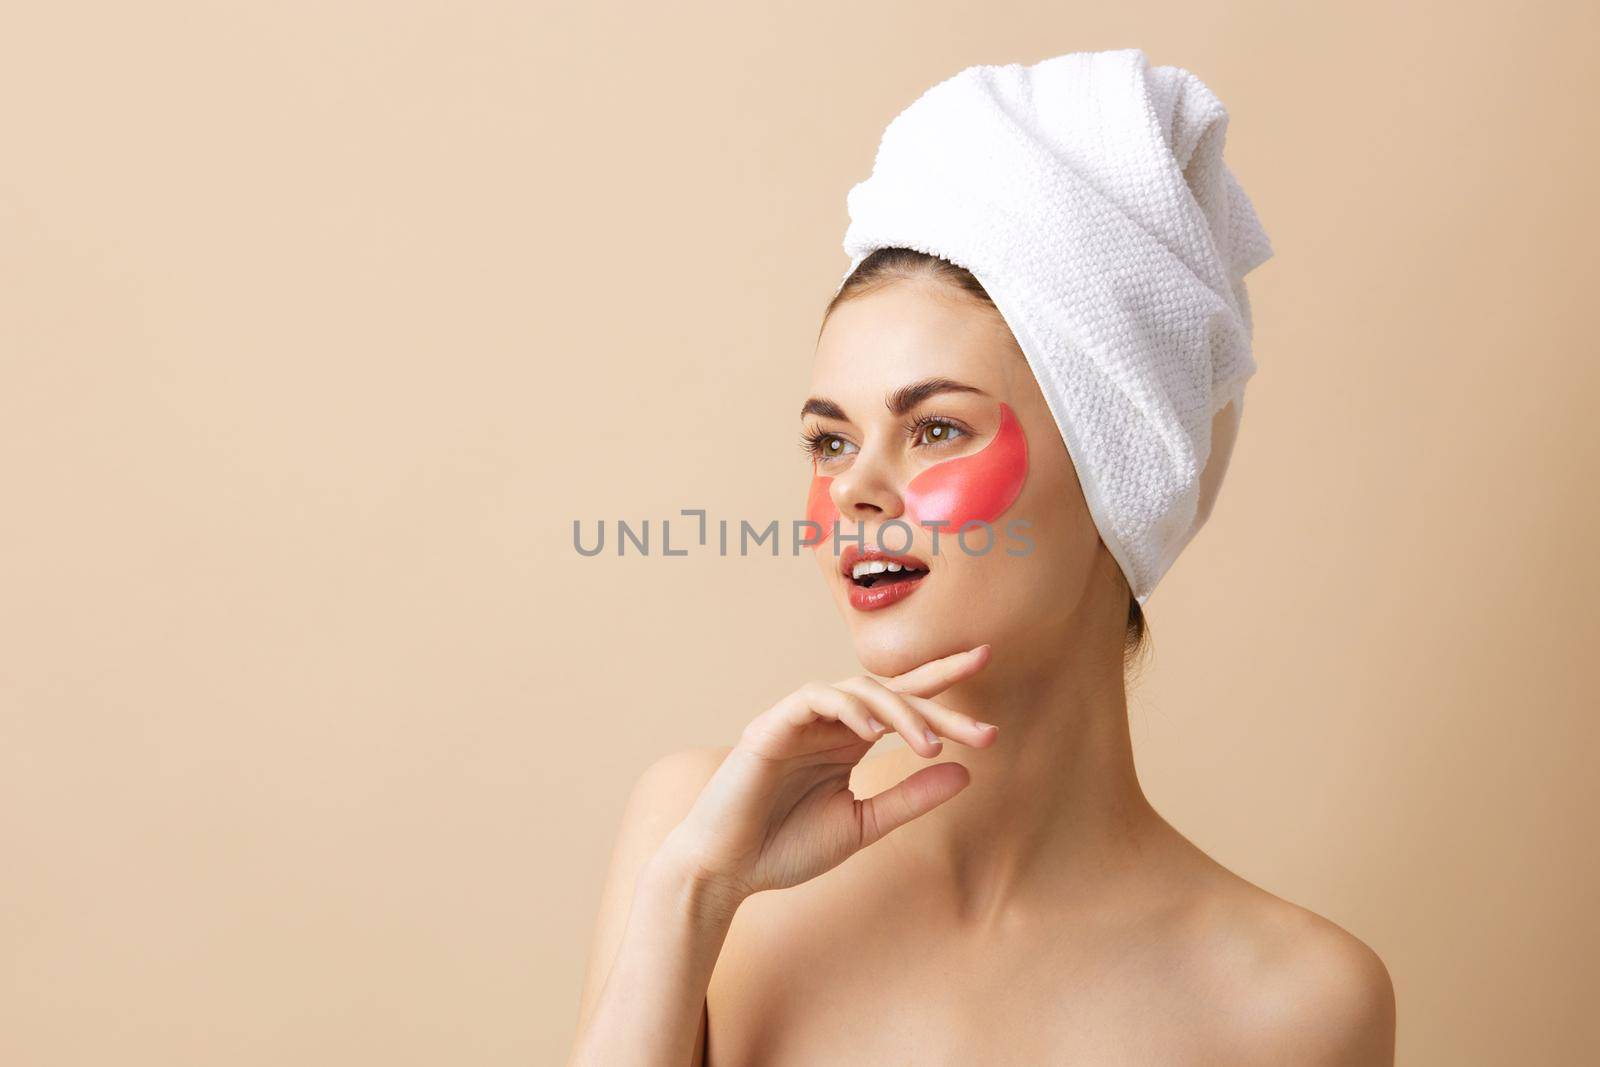 portrait woman skin care face patches bare shoulders beige background. High quality photo